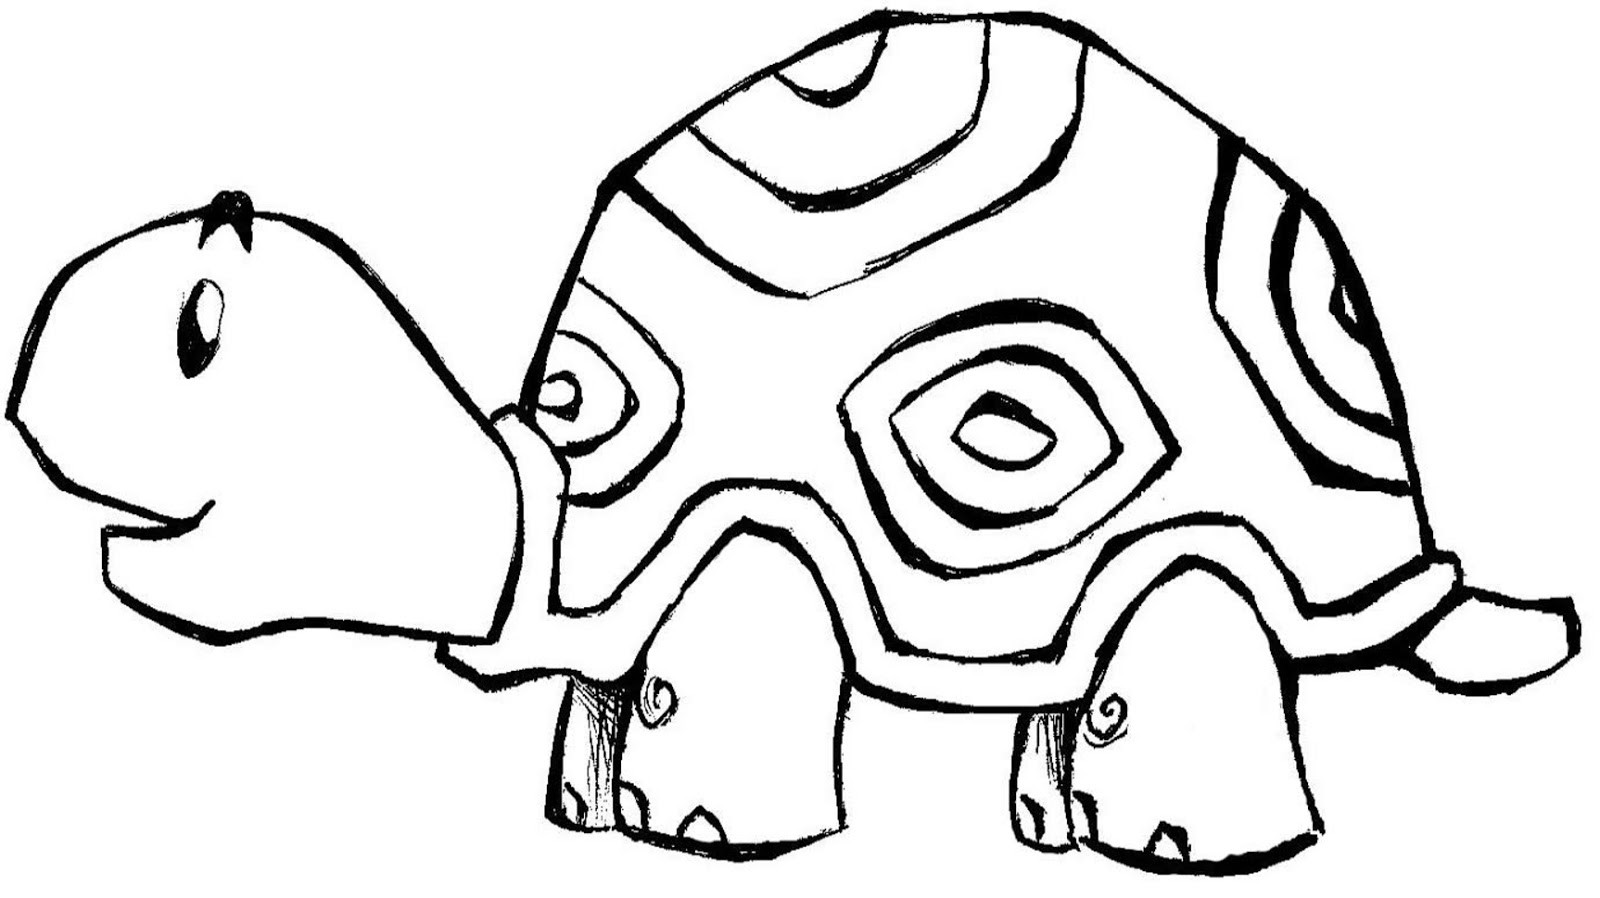 Coloring Pages For Kids To Print Out
 Coloring for Kids Turtle Child Coloring